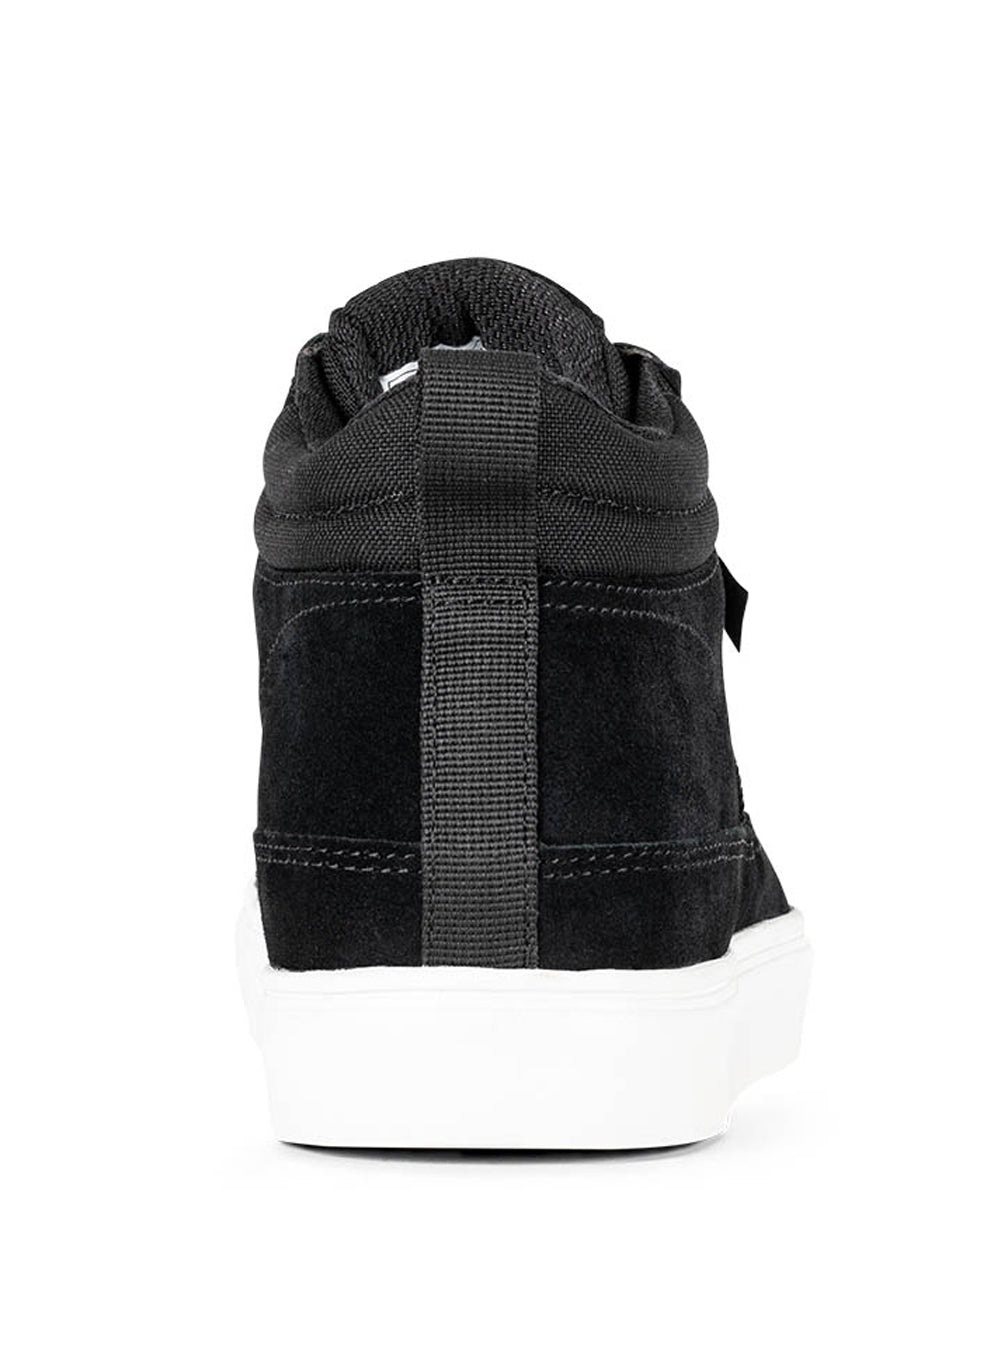 5.11 Tactical Norris Sneaker - Black/White - TacSource